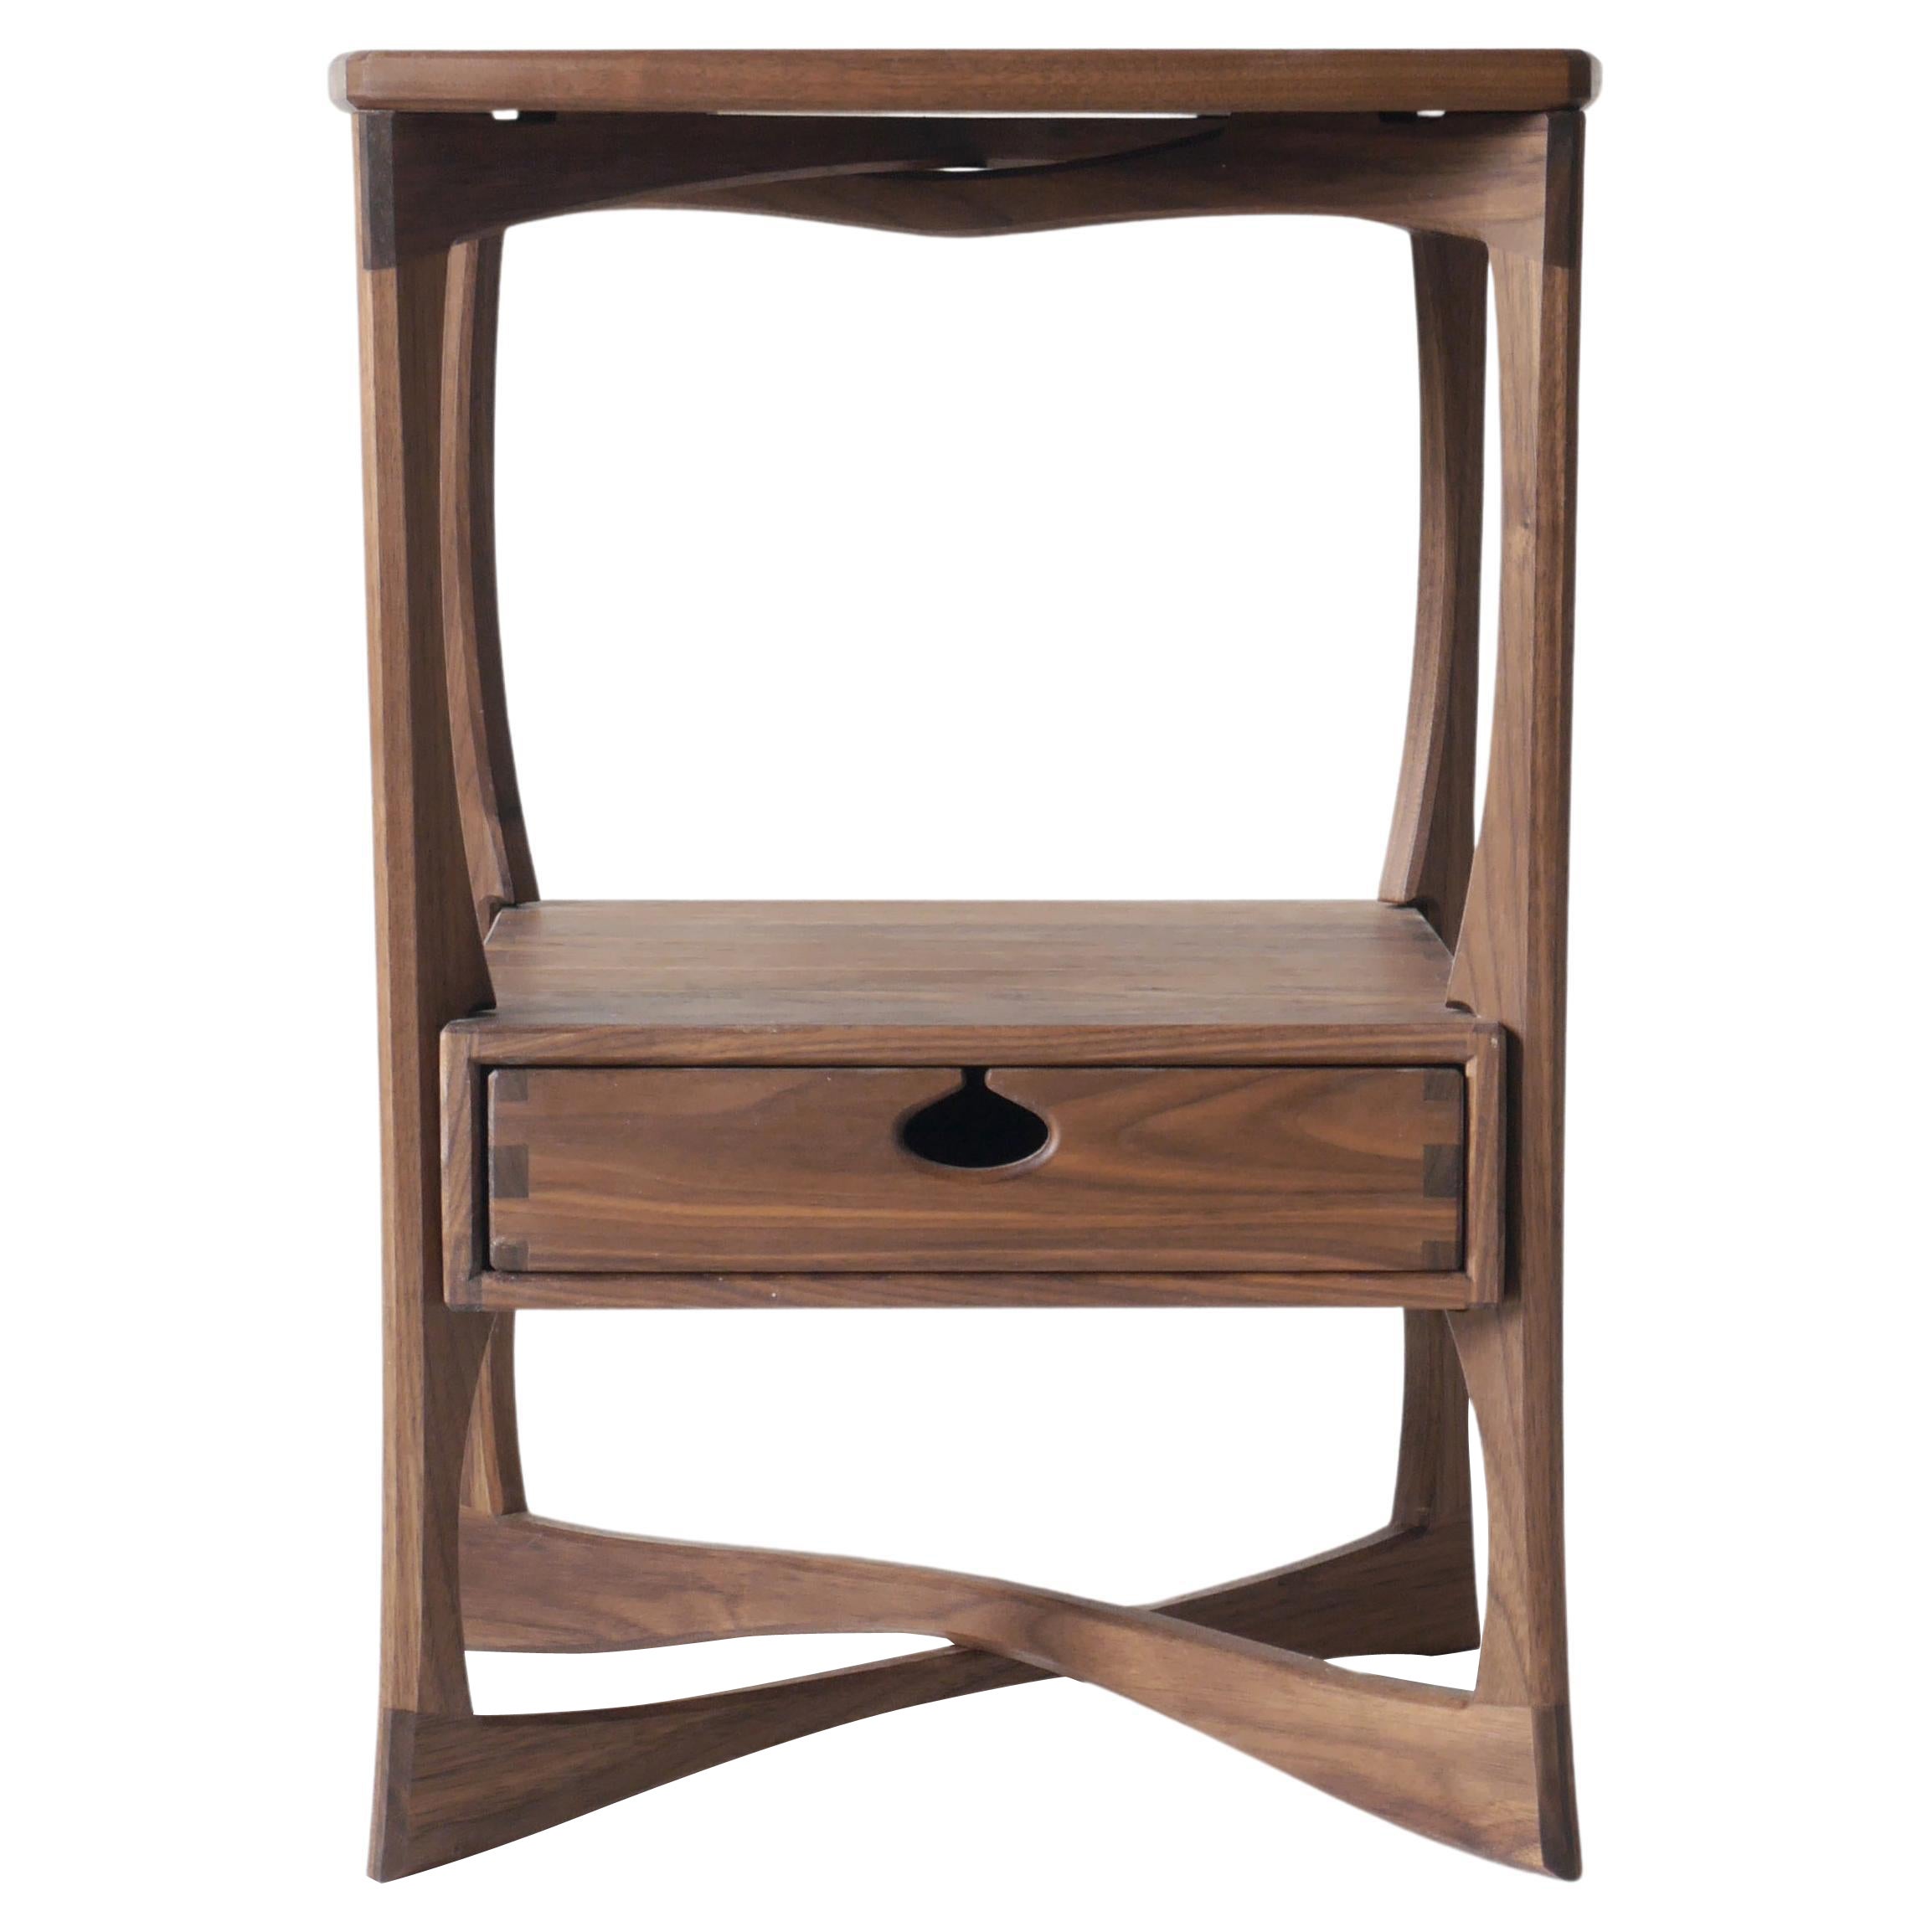 Walnut Roke Side Table, Modern End Table / Nightstand with one Drawer by Arid